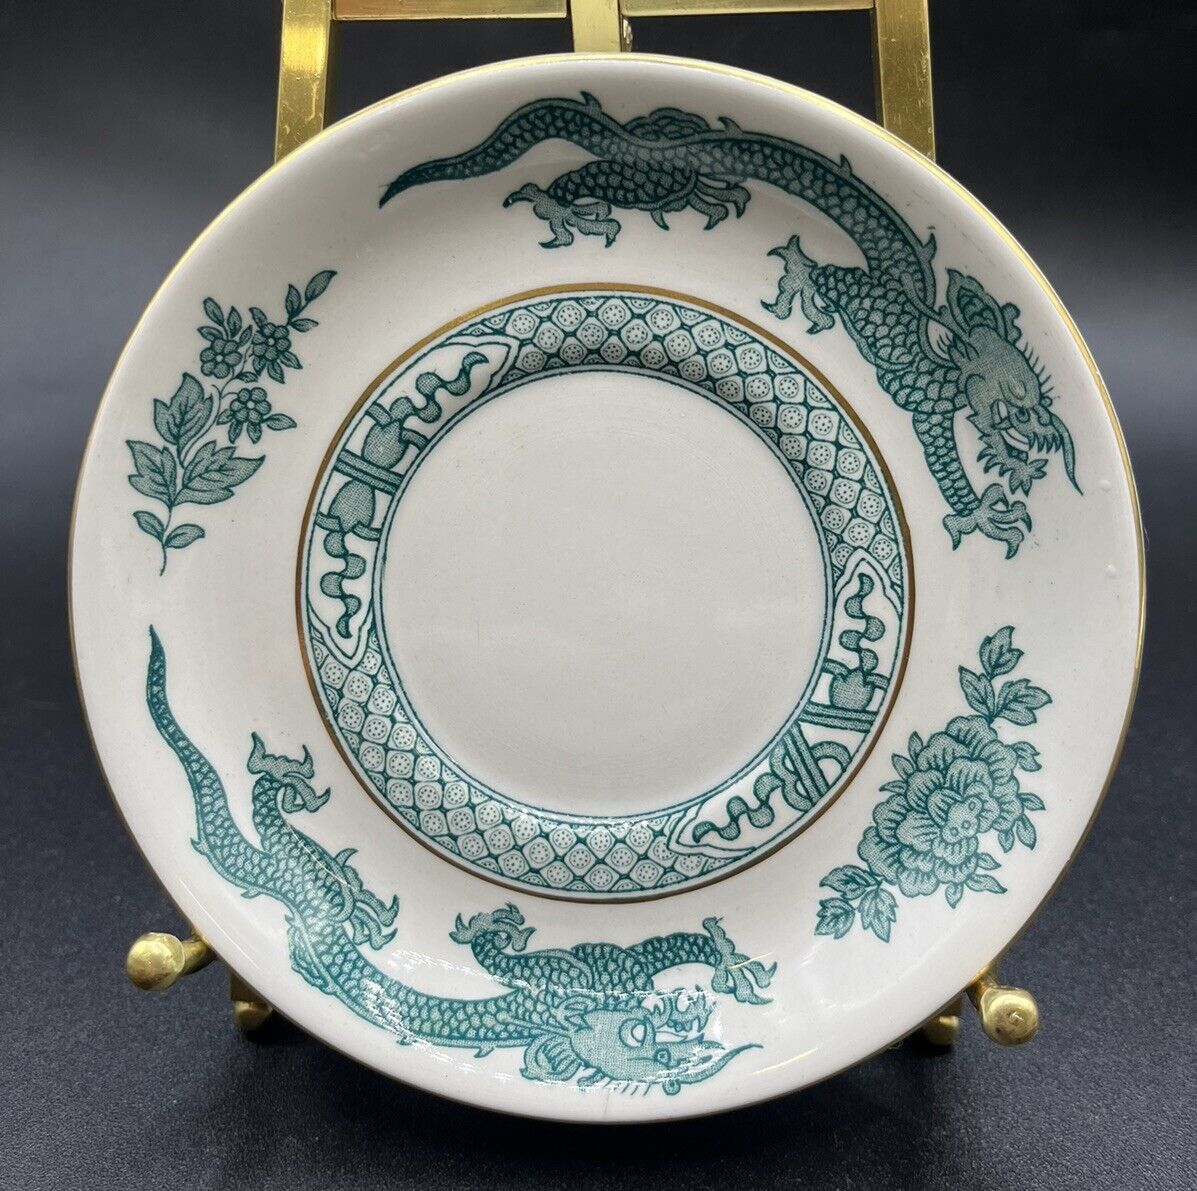 Vintage Booths Dragon Green Saucer Plate 5” Diameter Asian Made In England Tea